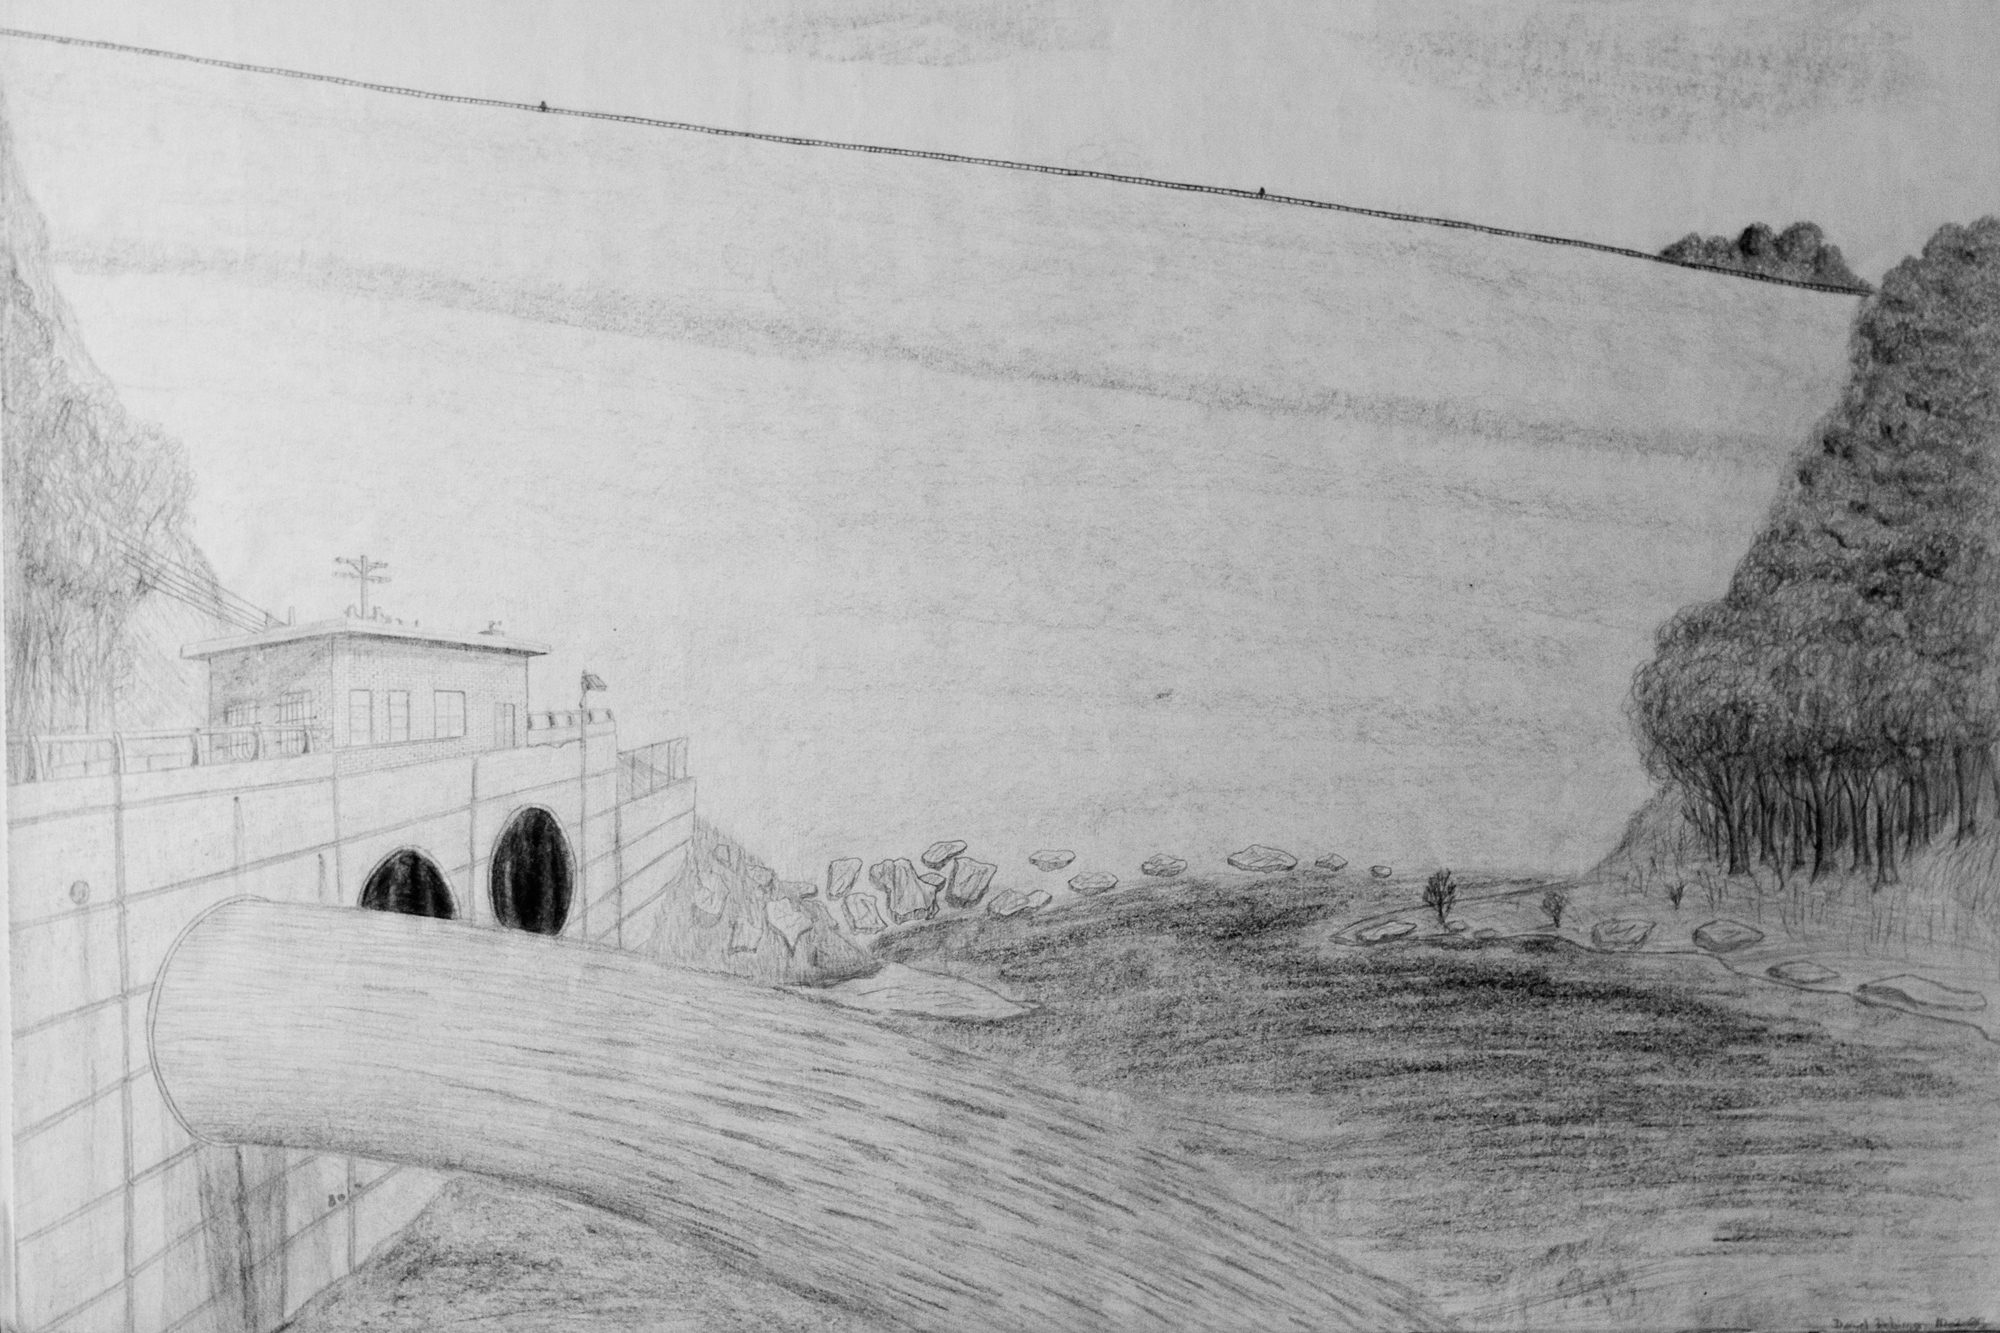 Summersville (WV) Dam with the old outlet tubes  pencil sketch